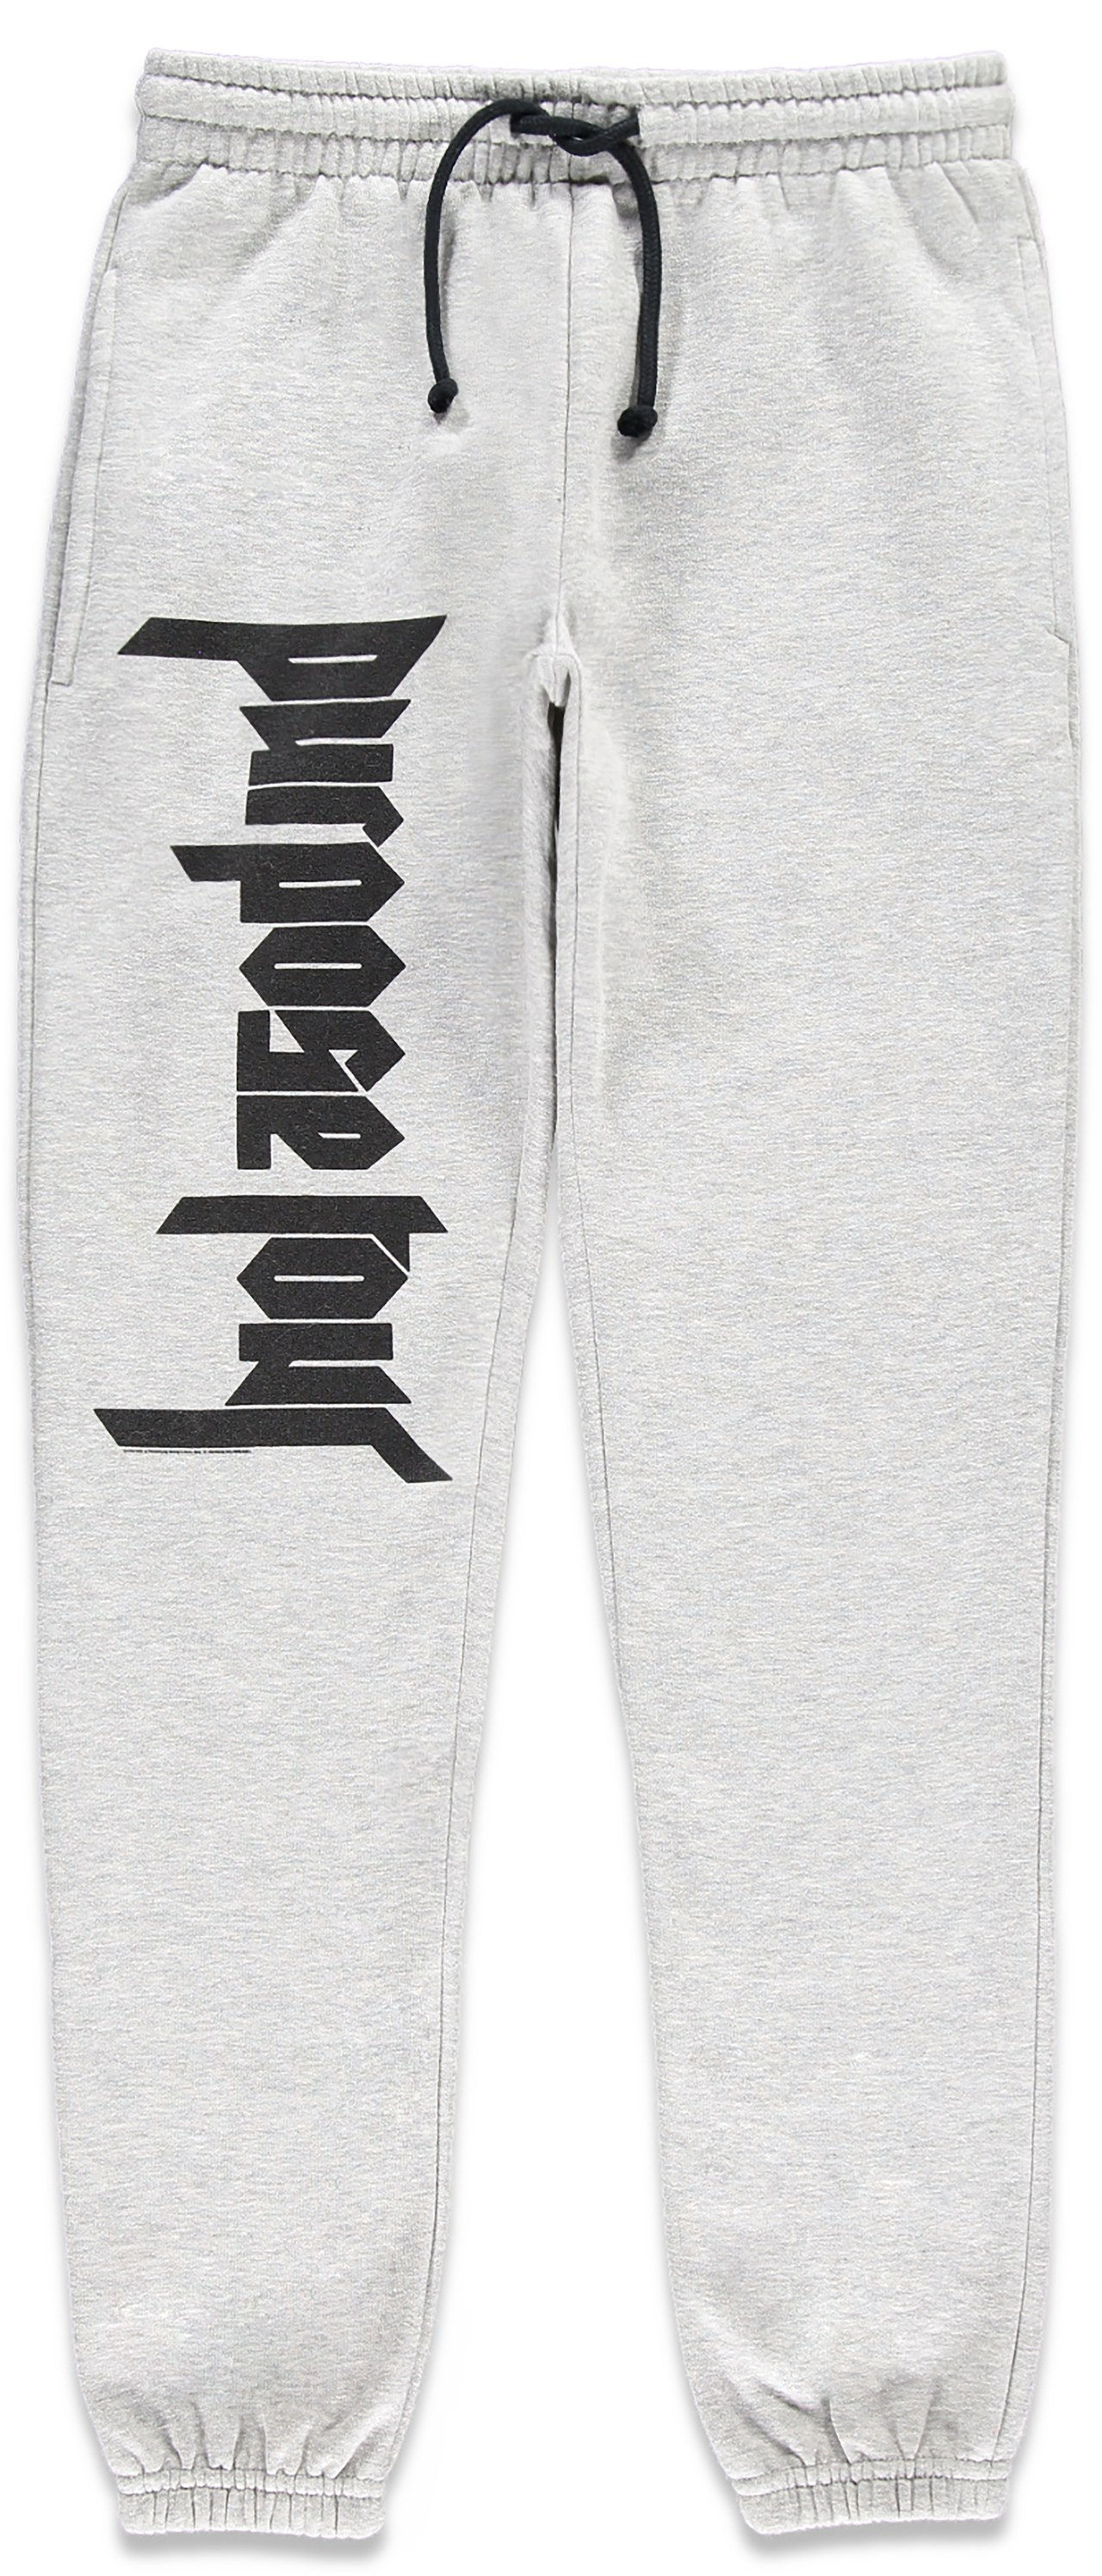 Jogginghose, [$23](http://www.forever21.com/Product/Product.aspx?BR=f21&Category=promo-purpose-tour&ProductID=2000231608&VariantID=011)